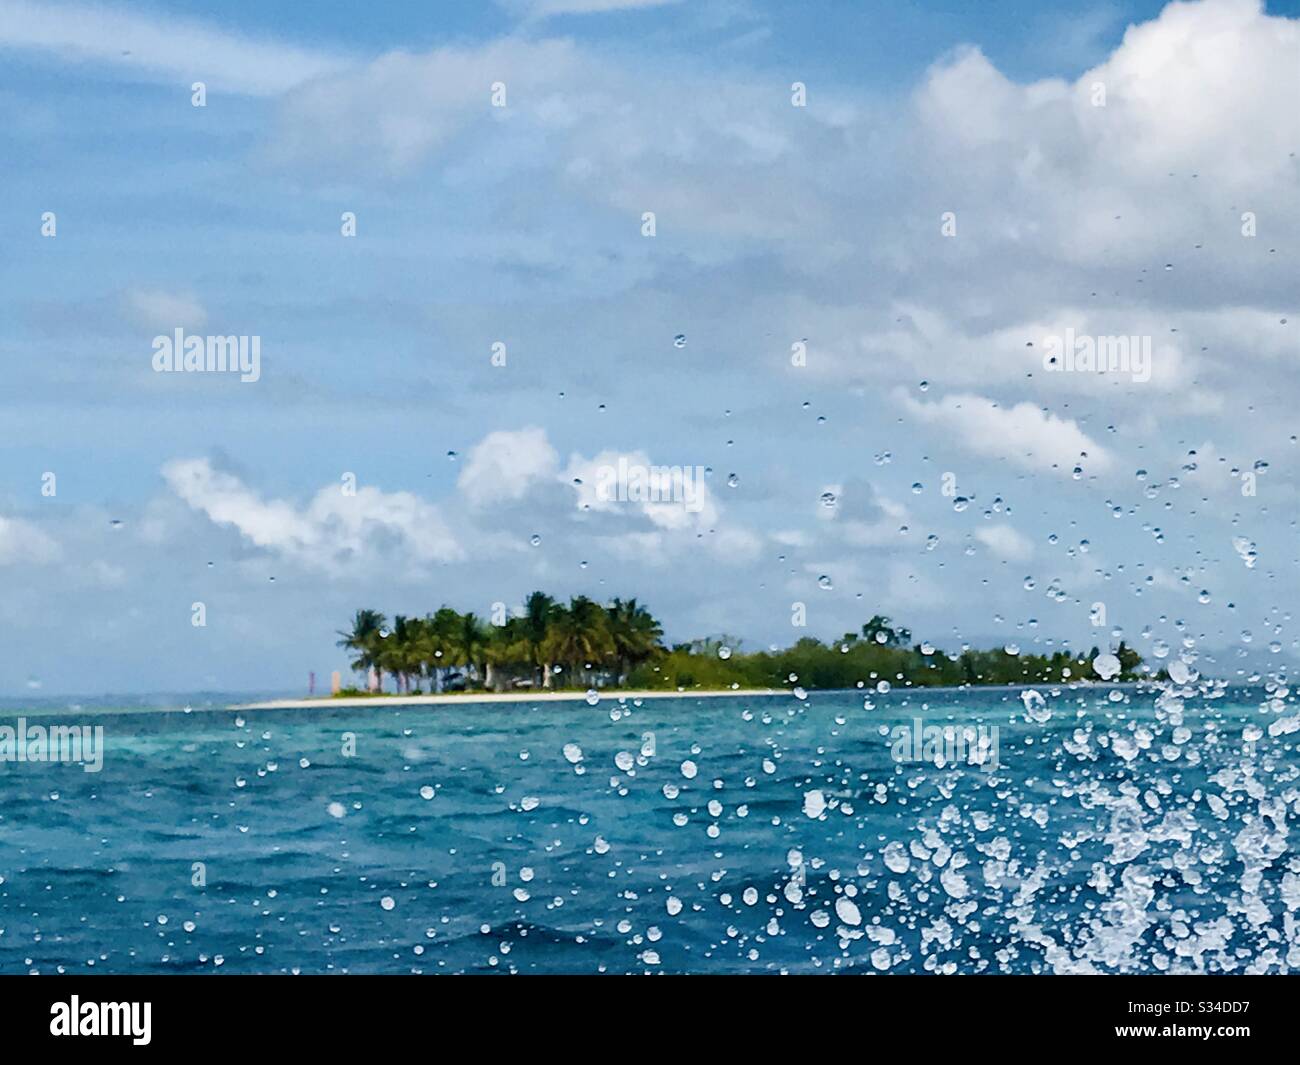 A refreshing splash of water from the boat ride, as we head to a secluded island. What a dream holiday to be in the middle of paradise. Stock Photo